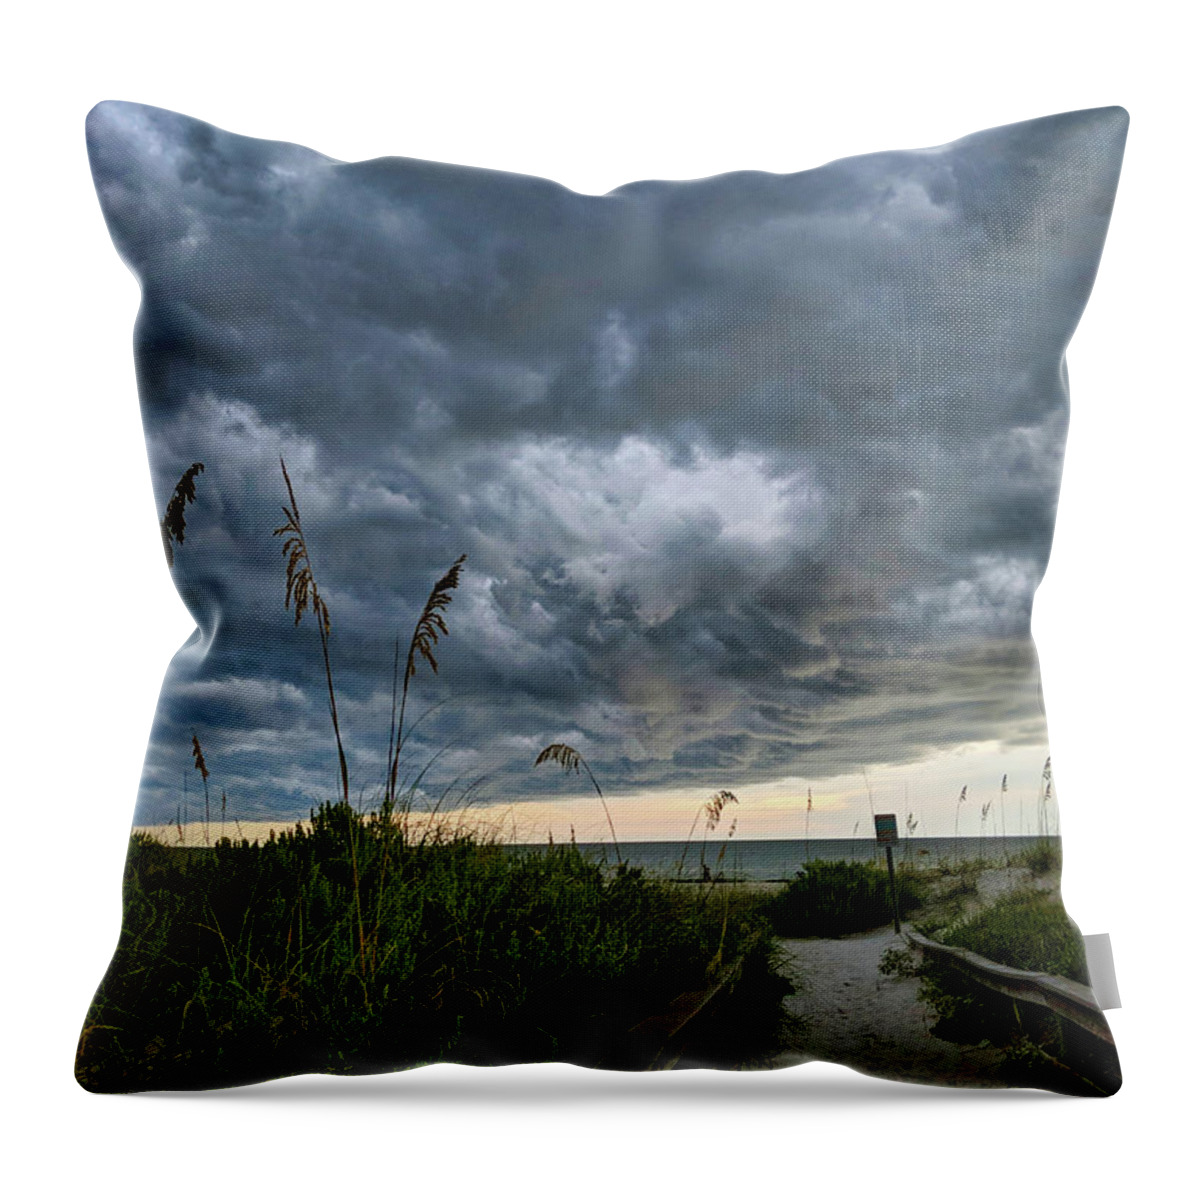 Sky Throw Pillow featuring the photograph Stormy Sunset by Portia Olaughlin